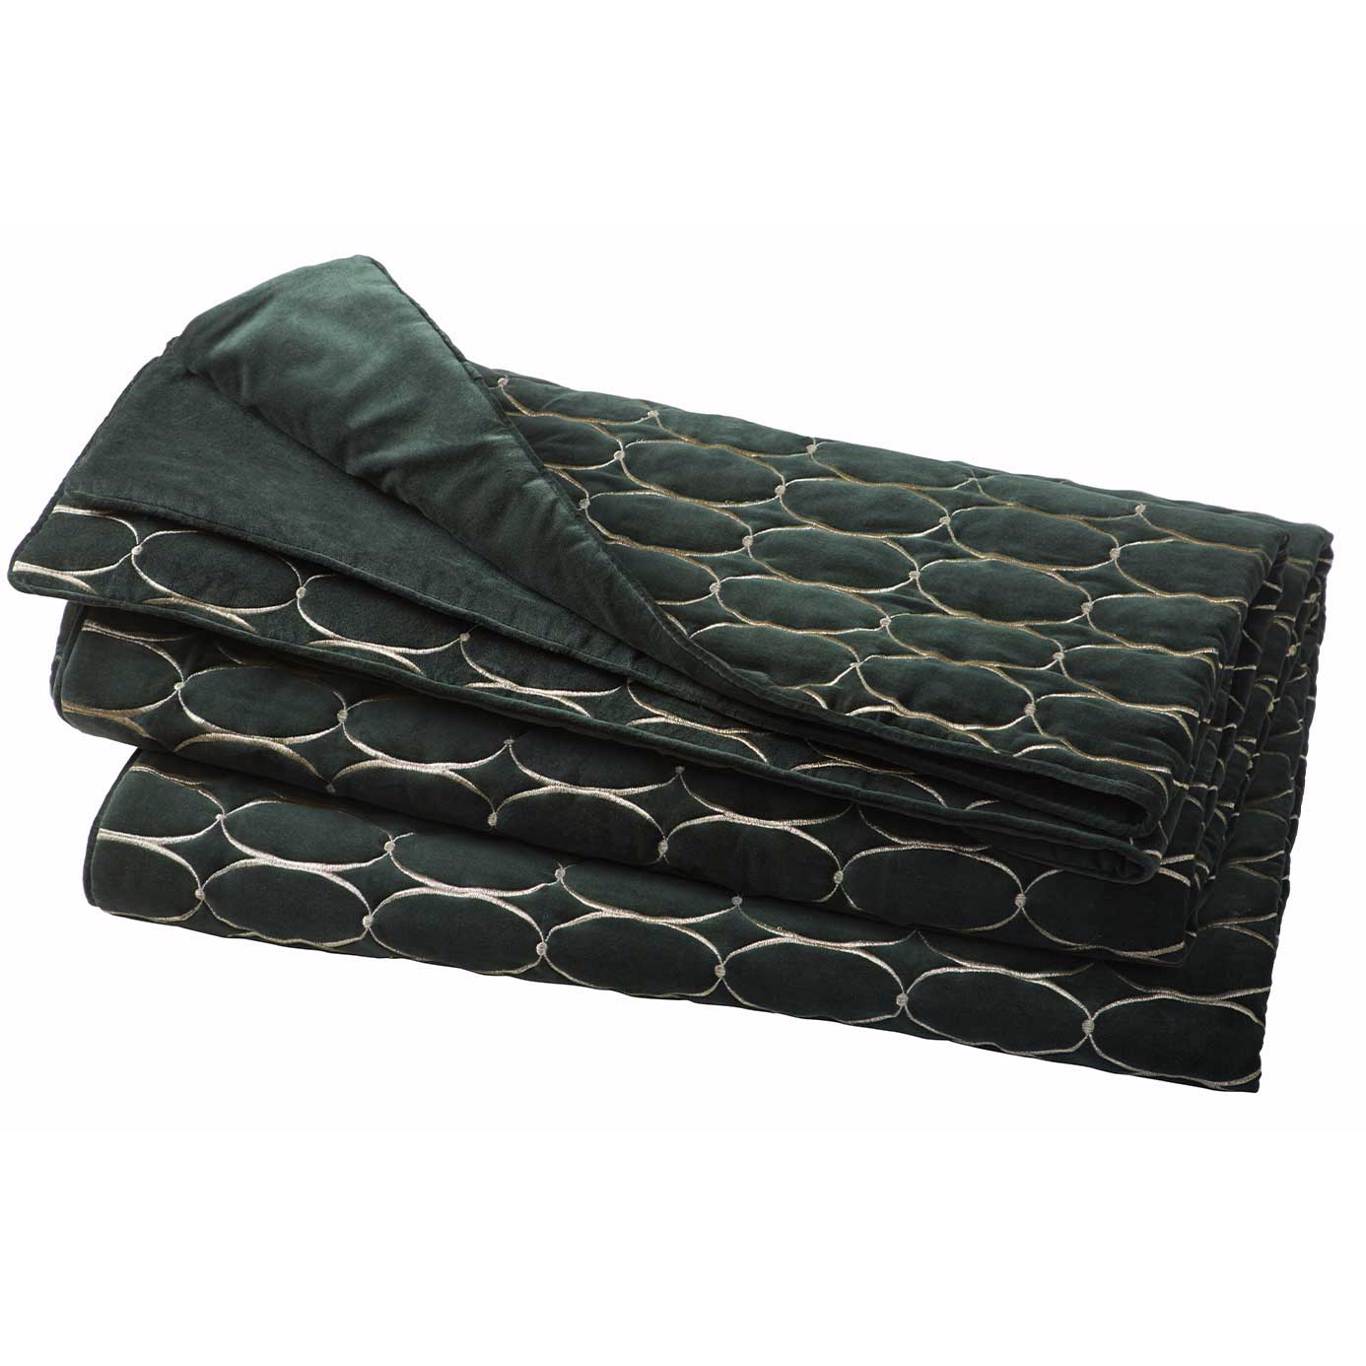 Renaissance Throw Emerald Bedding by WED